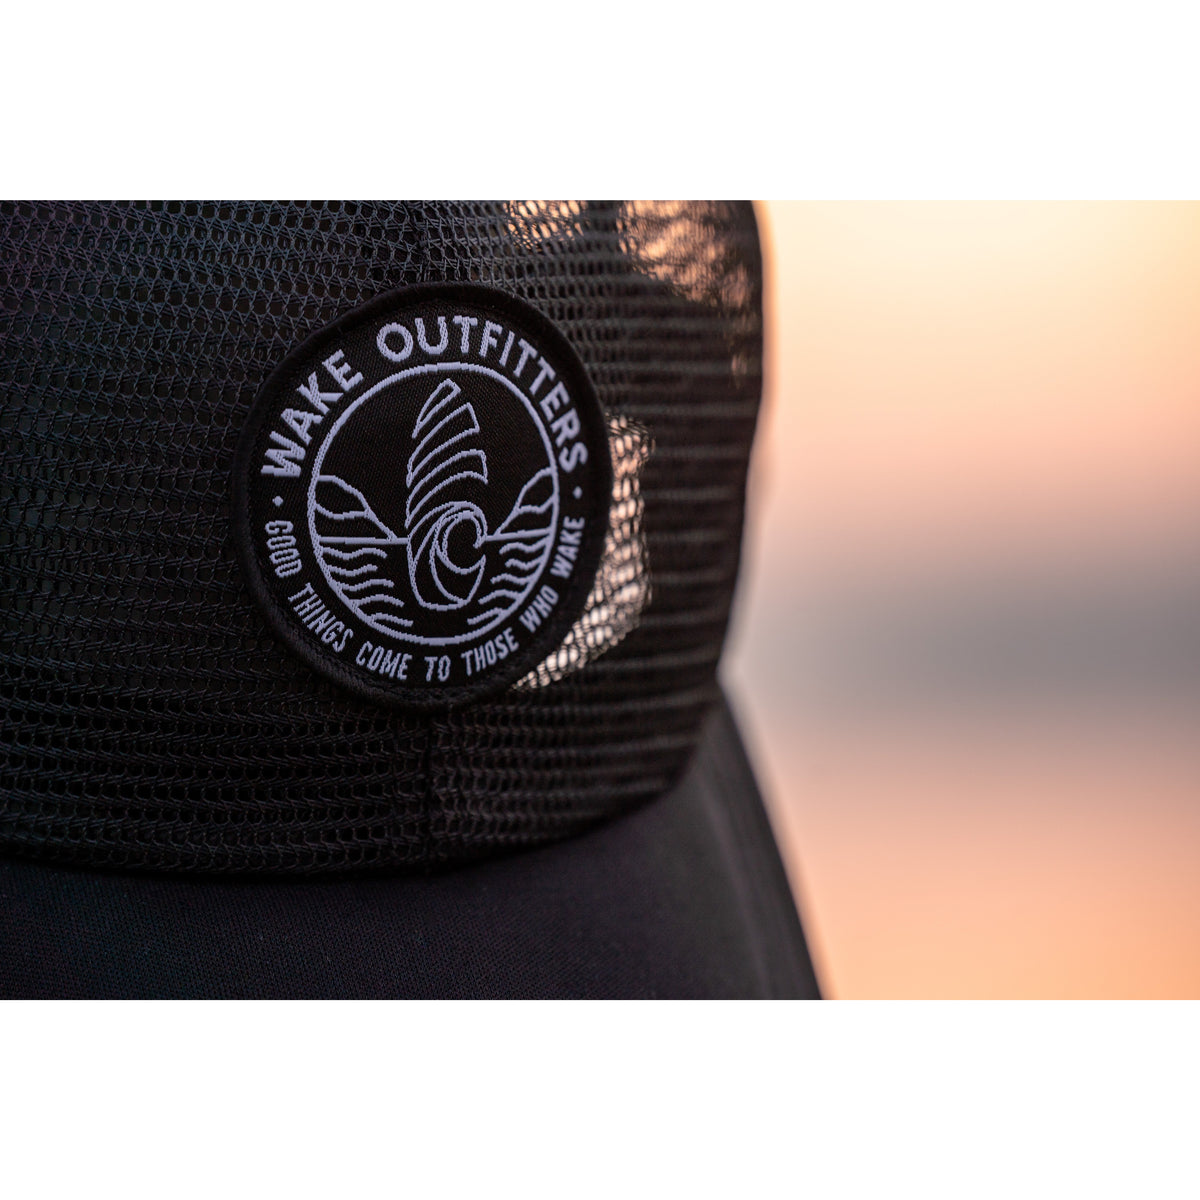 Wake Outfitters Full Mesh Hat